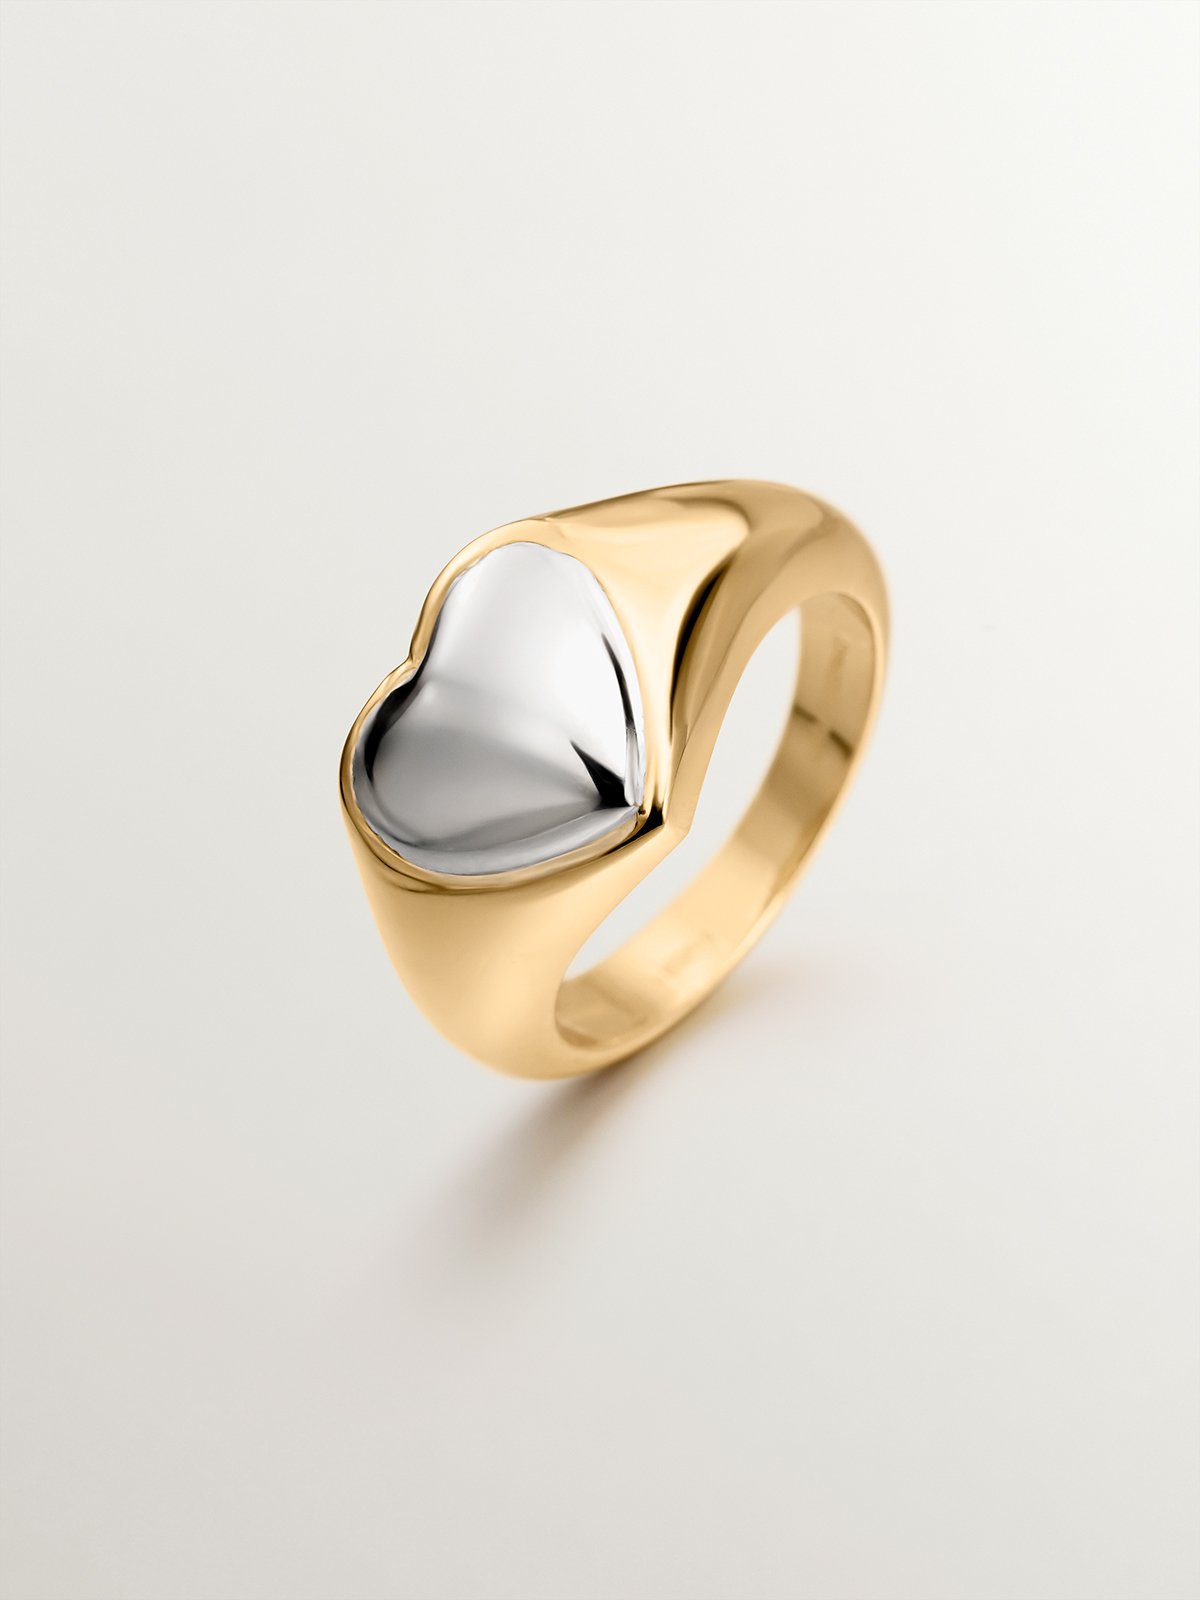 925 combined silver seal ring bathed in 18k yellow gold